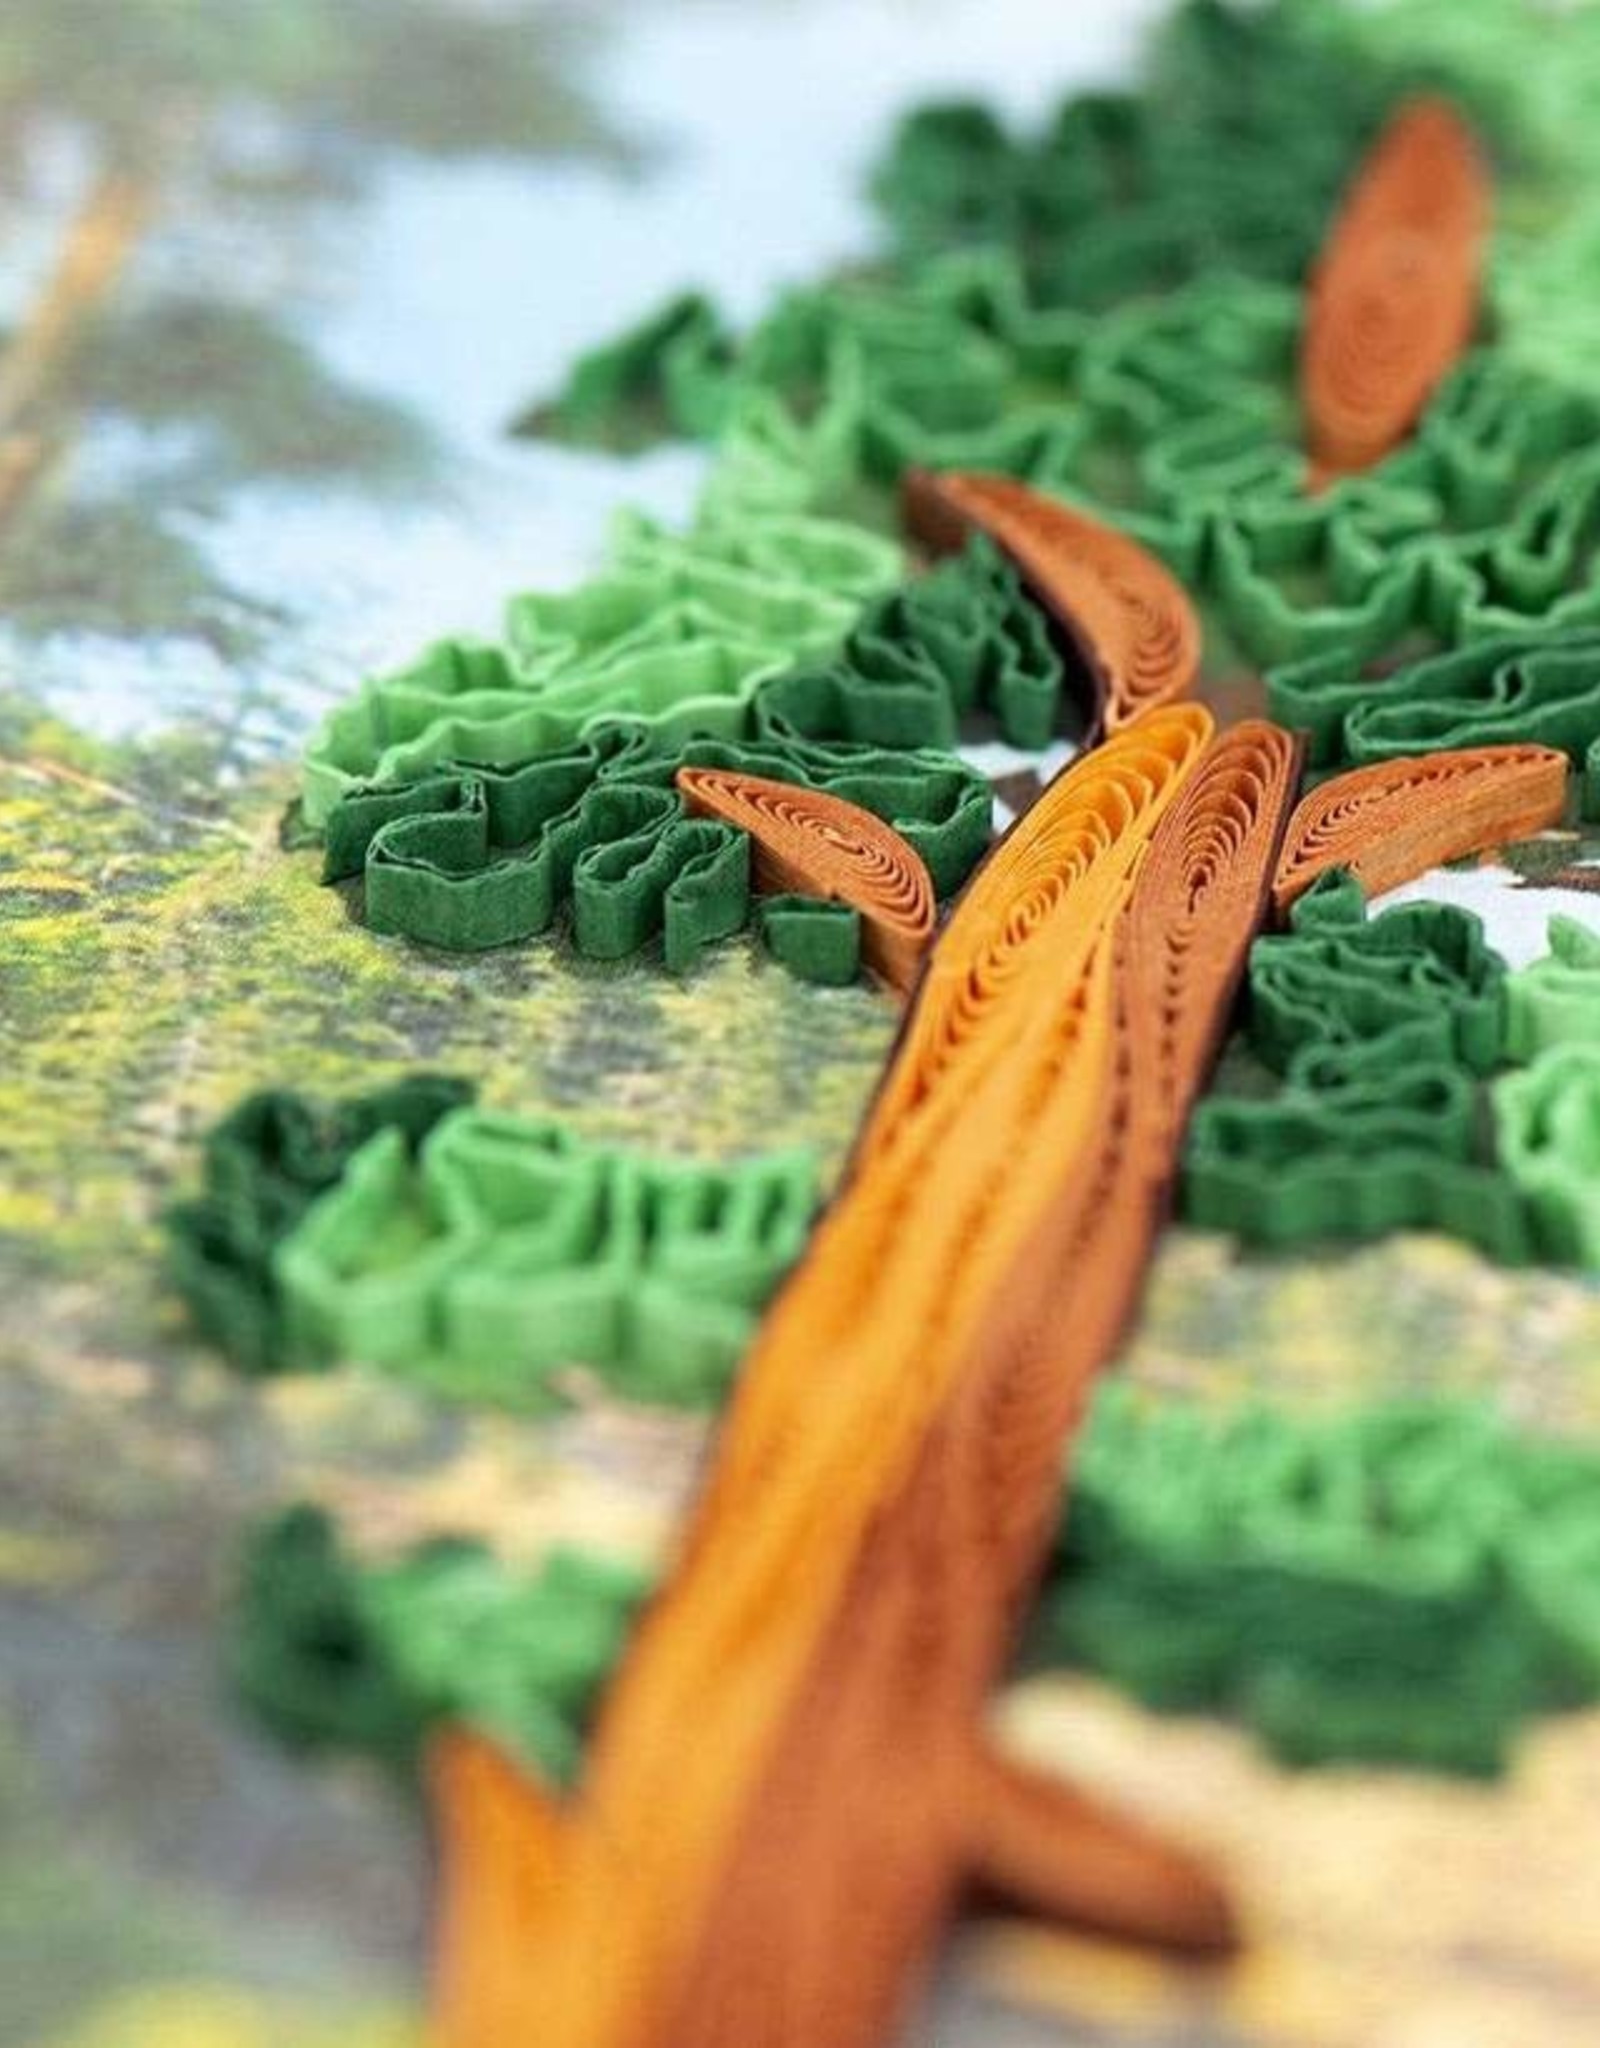 Quilling Card Quilled Redwood Tree Greeting Card